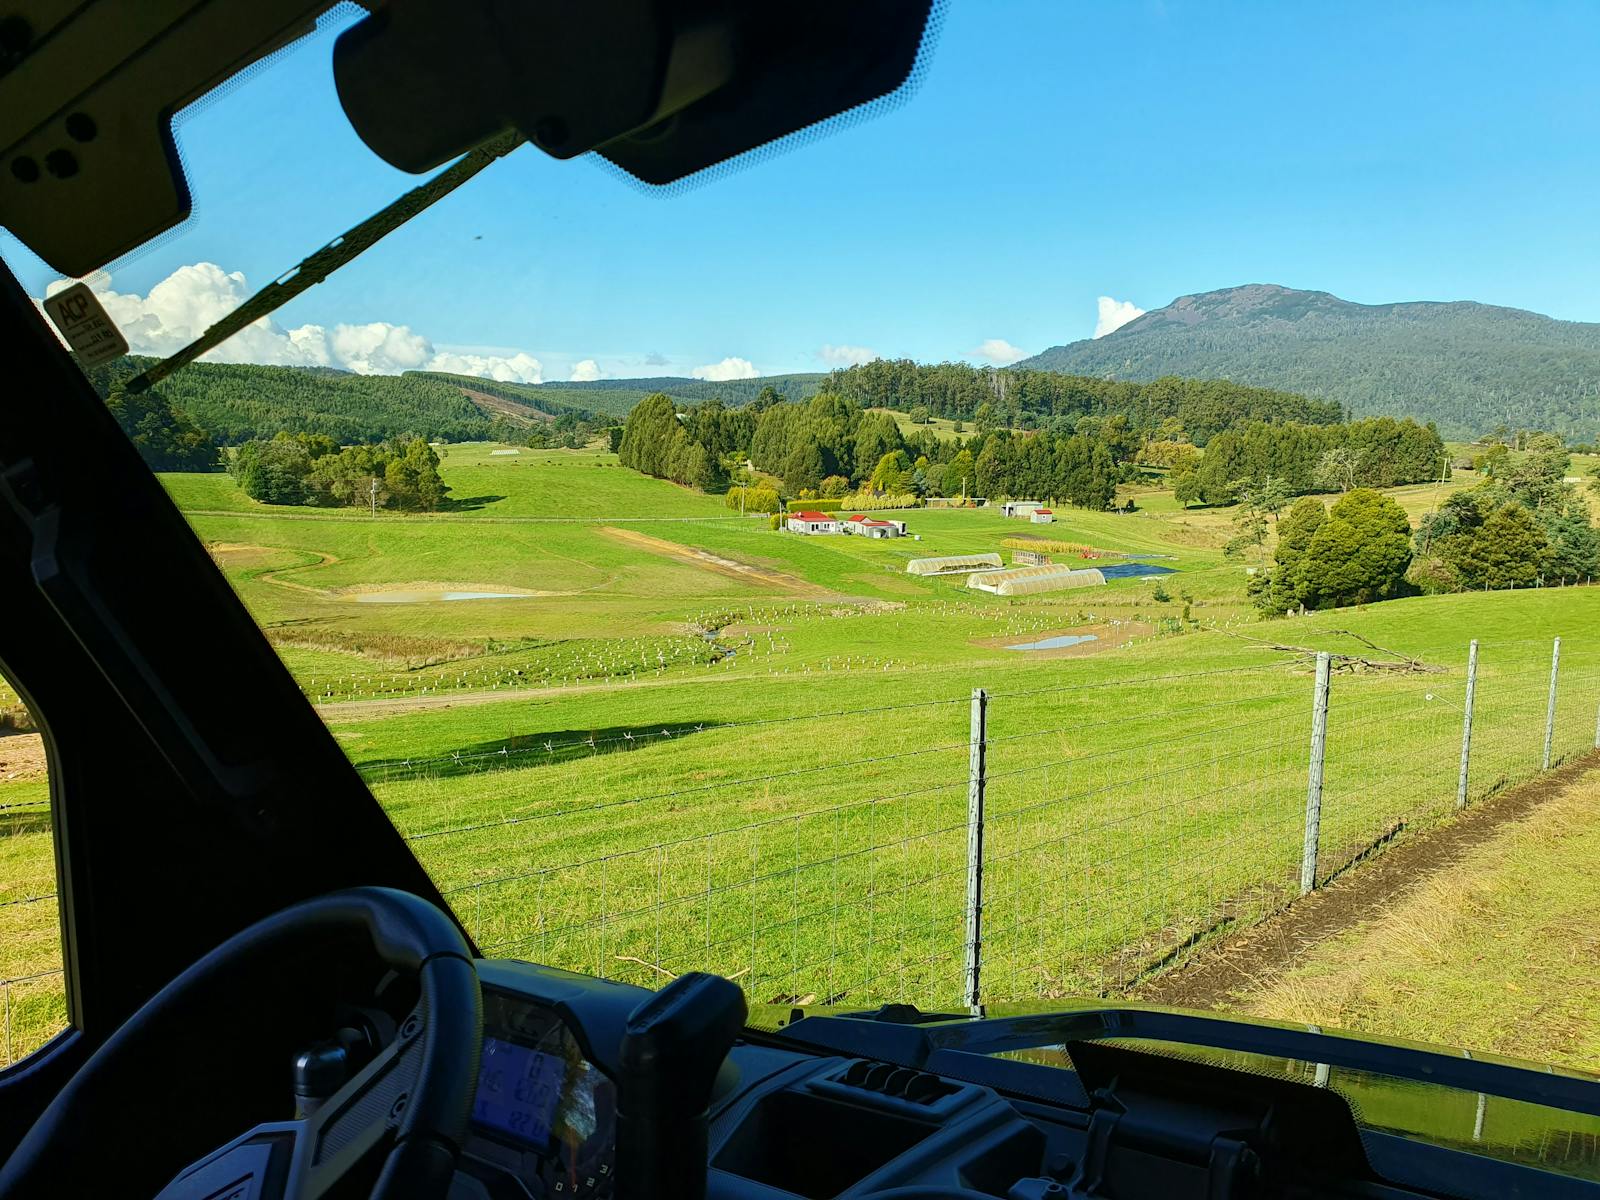 View from front seat of ATV looking over green paddocks with Mt Arthur in background